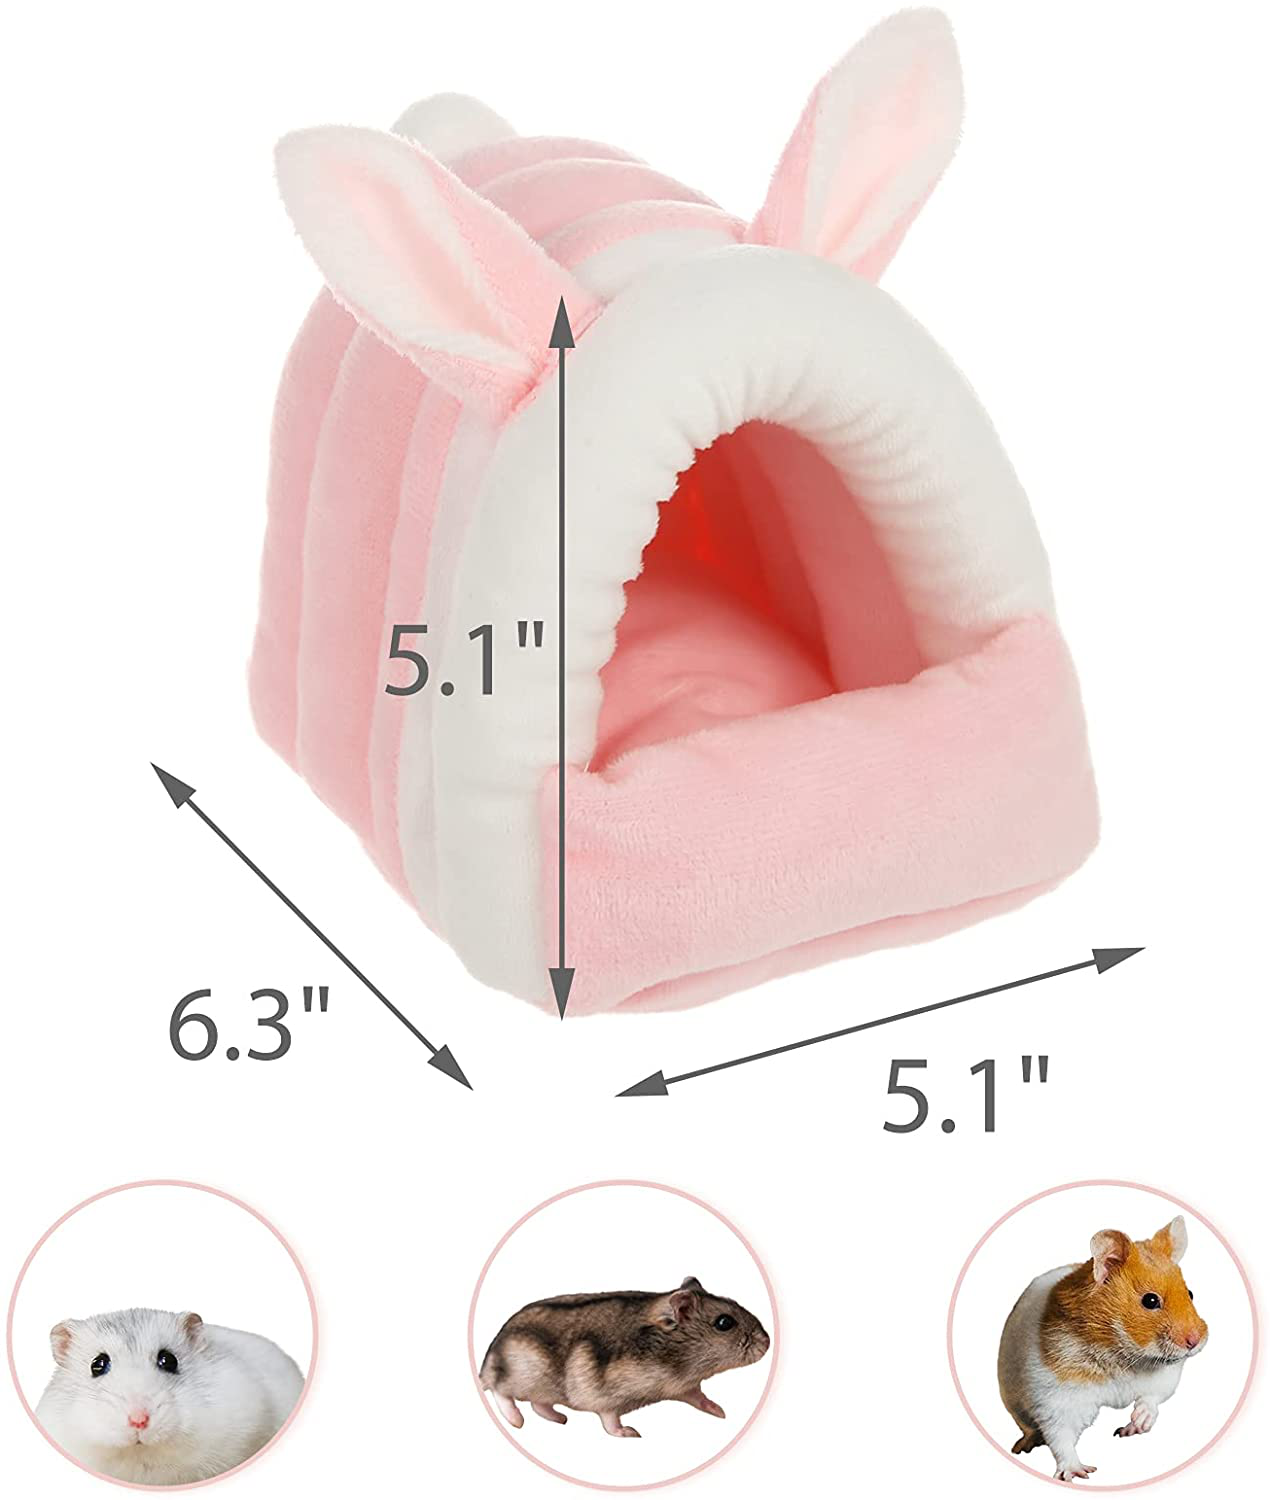 Mictovin Hamster Bed House for Winter Cozy Hamster Bedding Cage Accessories Warm Hamster Habitat Small Animal Houses for Hamster Bearded Dragon Hedgehog Rat